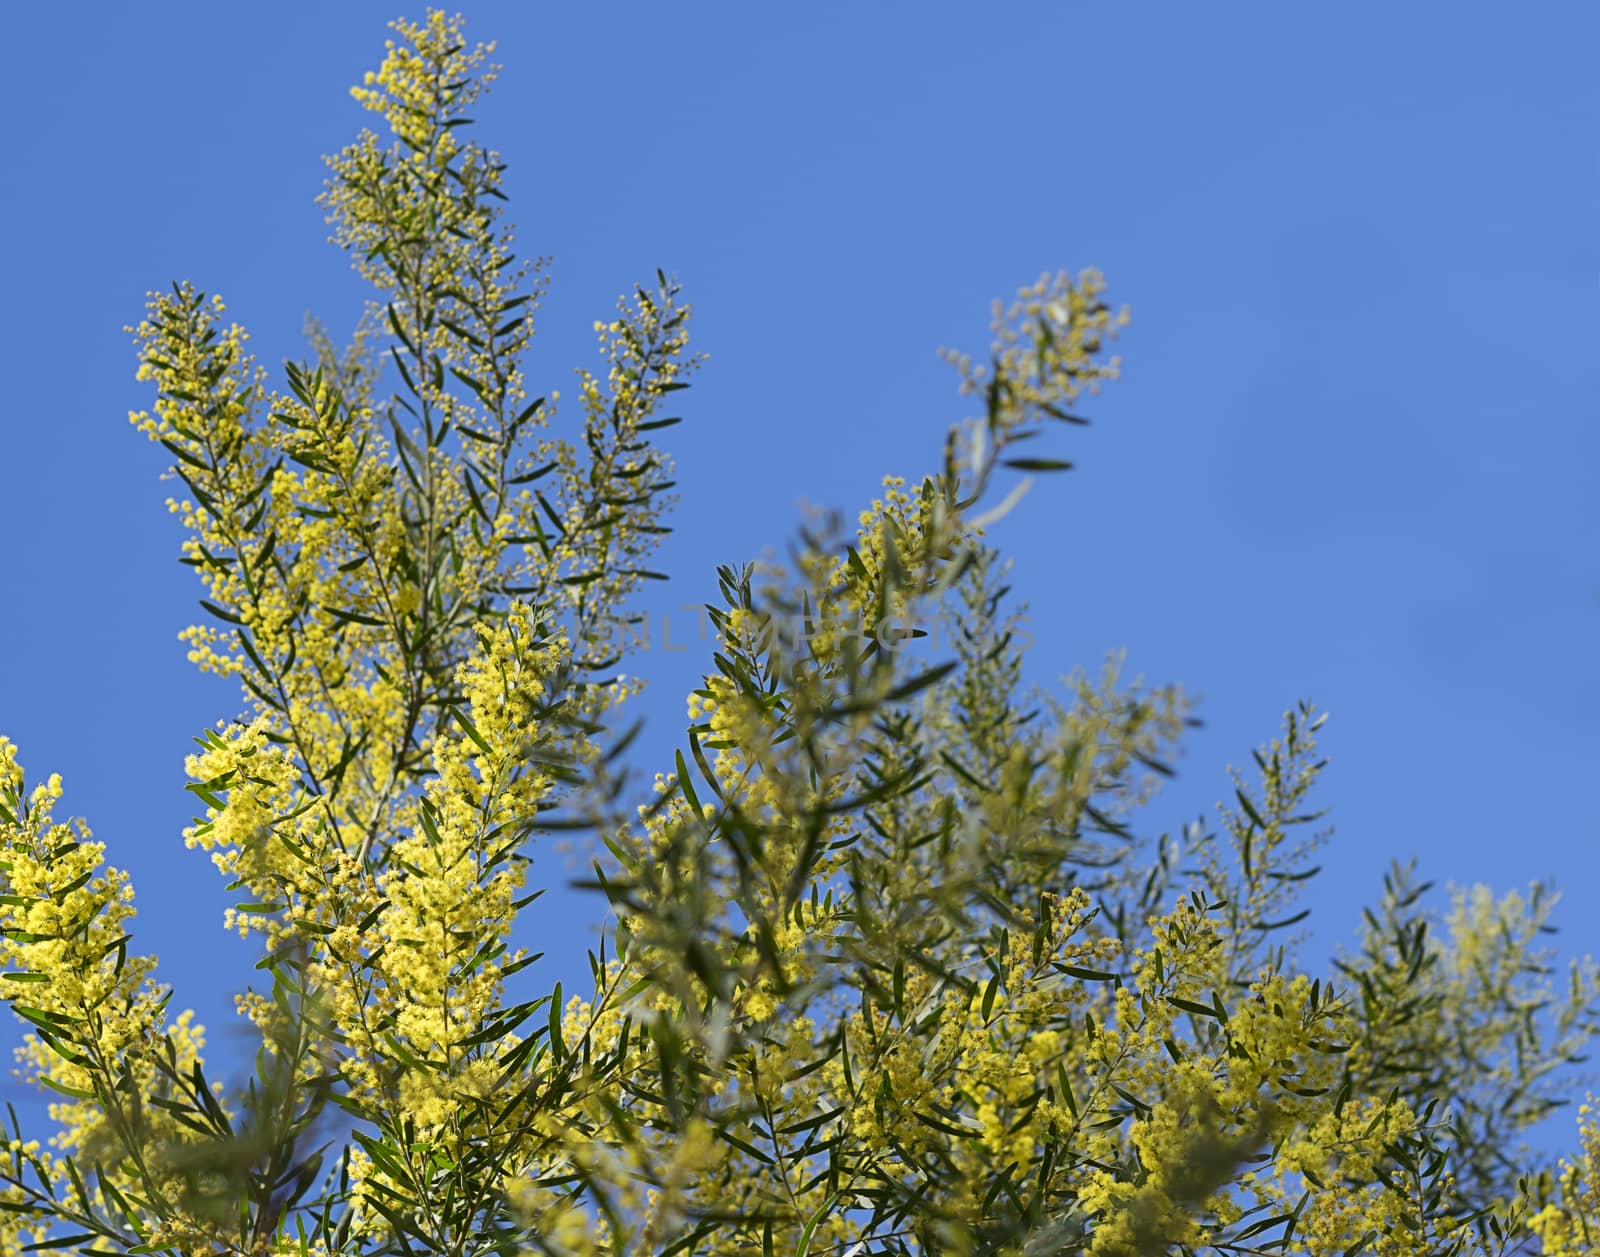 Iconic Australian Spring Wildflower Golden Wattle Acacia fimbriata against clear blue sky